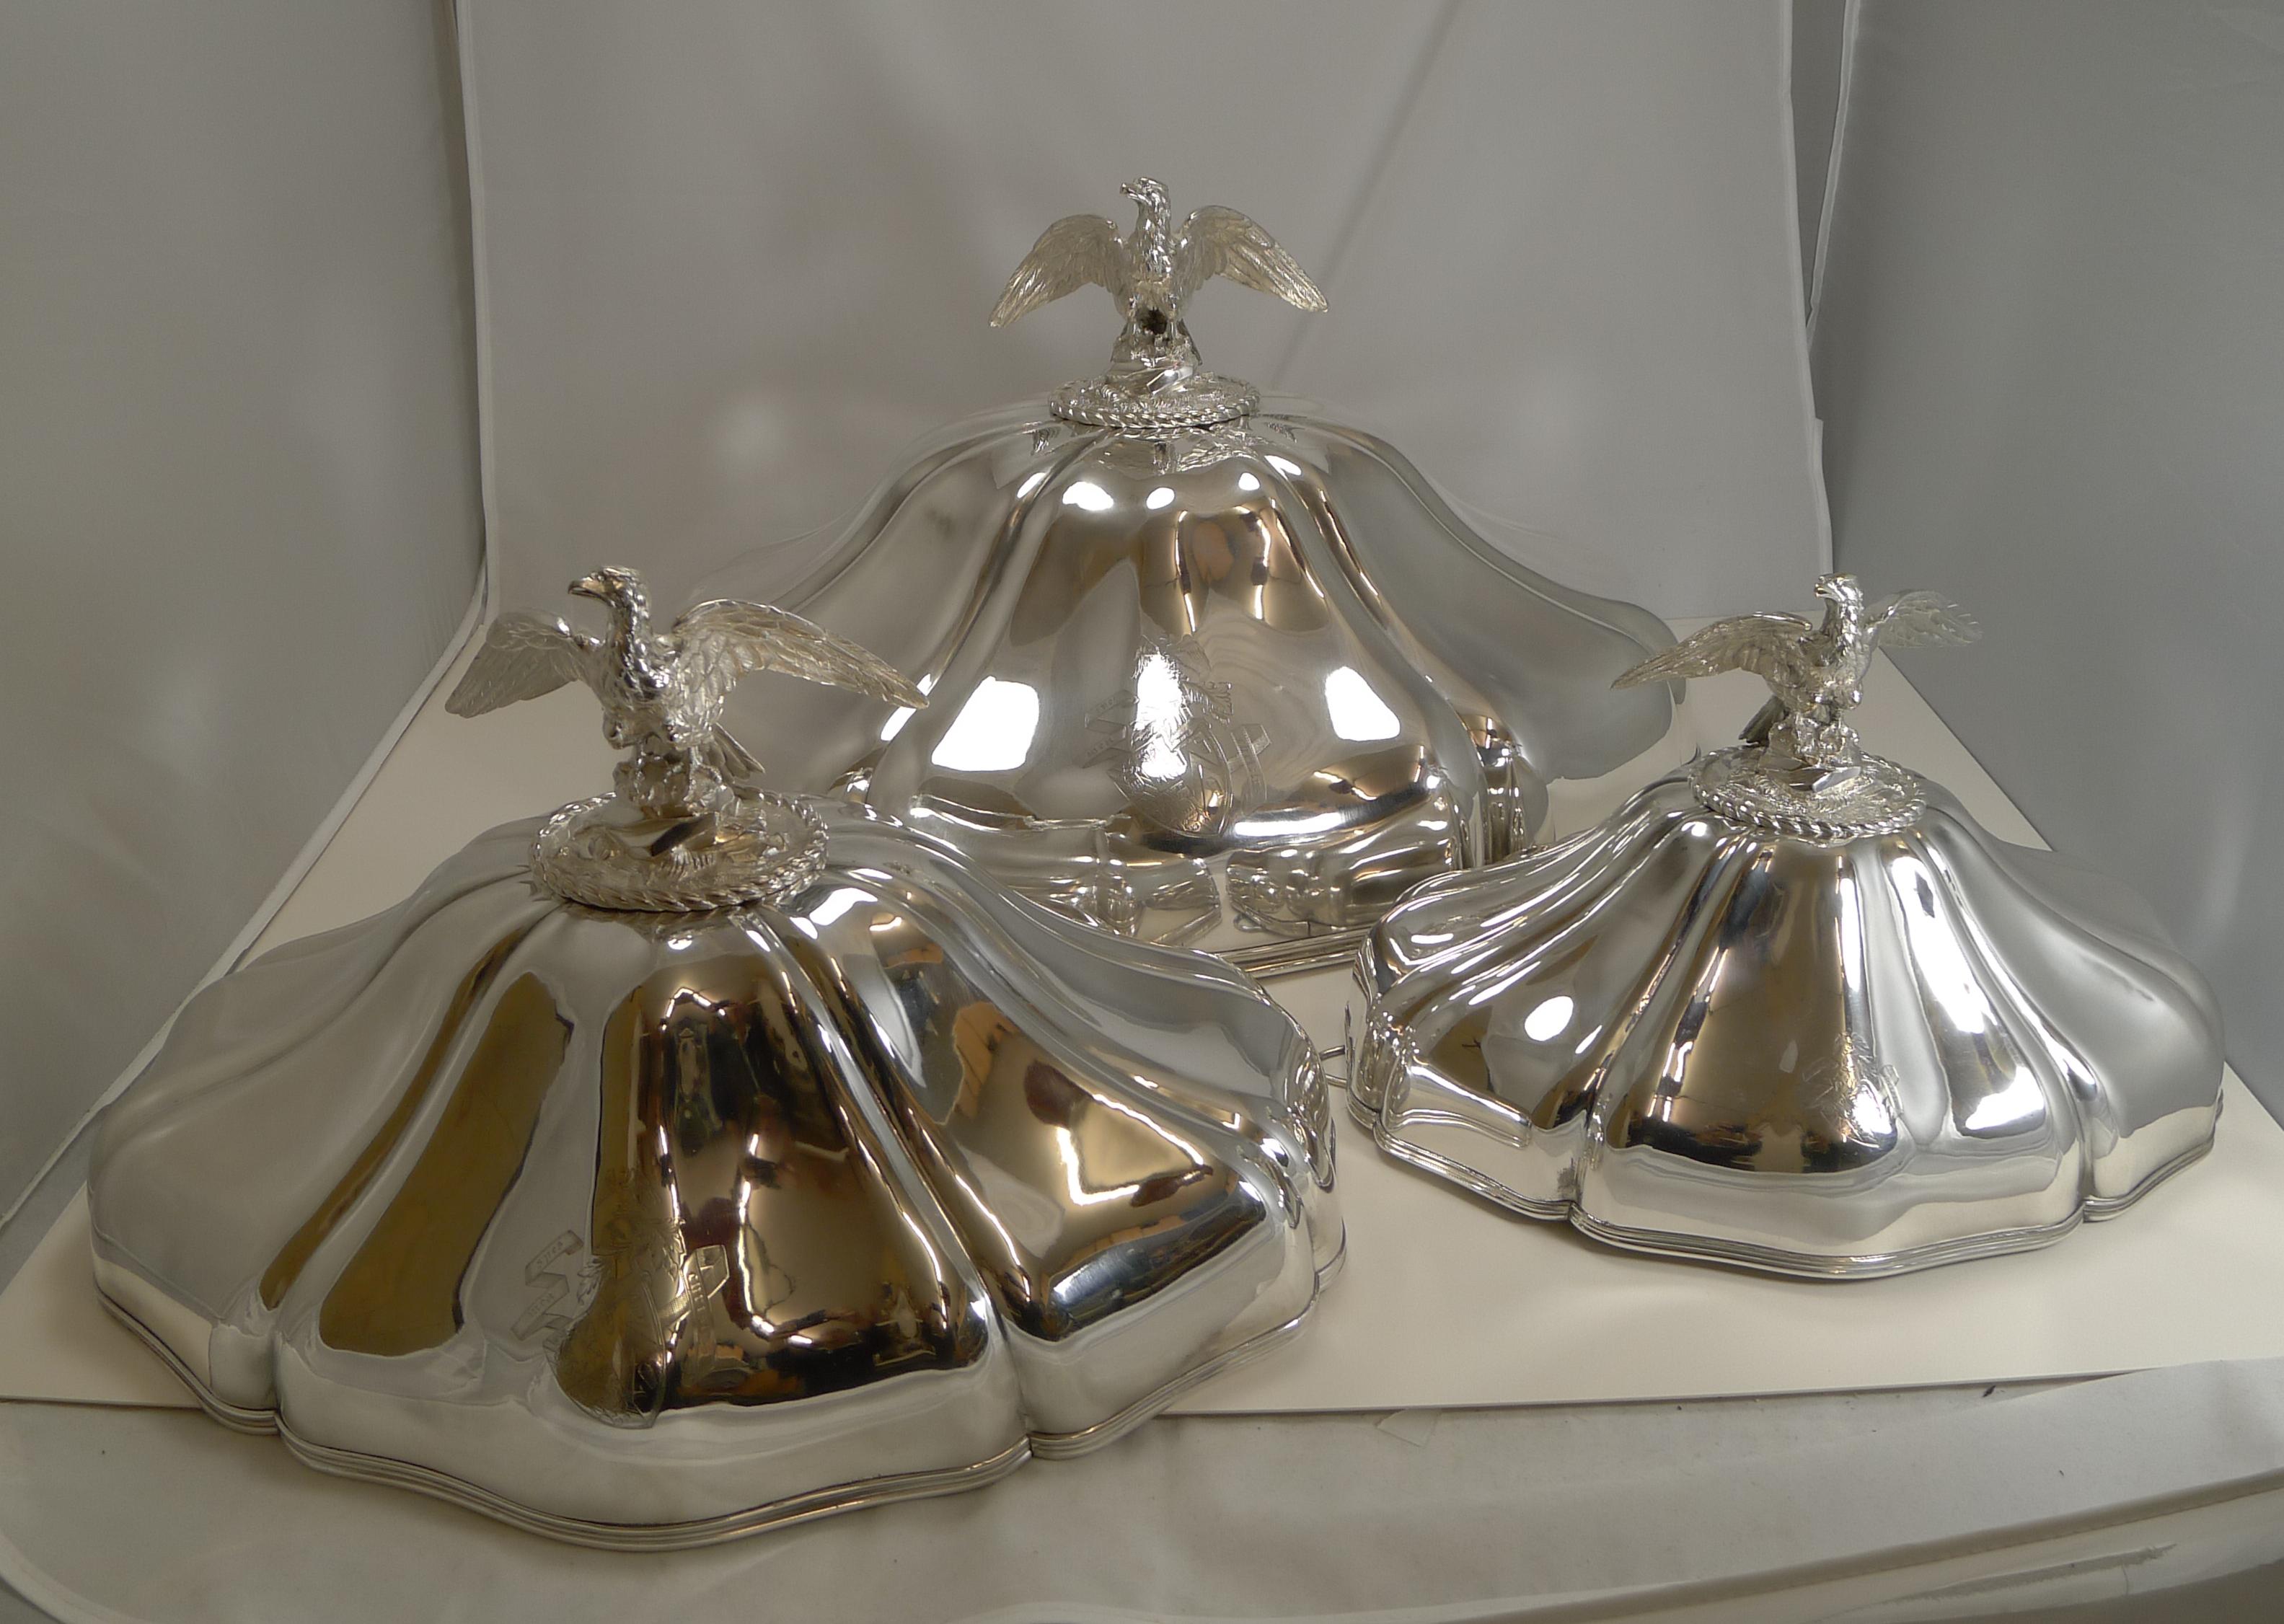 Without doubt, the very best I have ever seen and owned. This grand set of three graduated silver plated domes are all handmade, you can see the hand beating on the interior of all of them where they were formed by hand, amazing quality.

Of